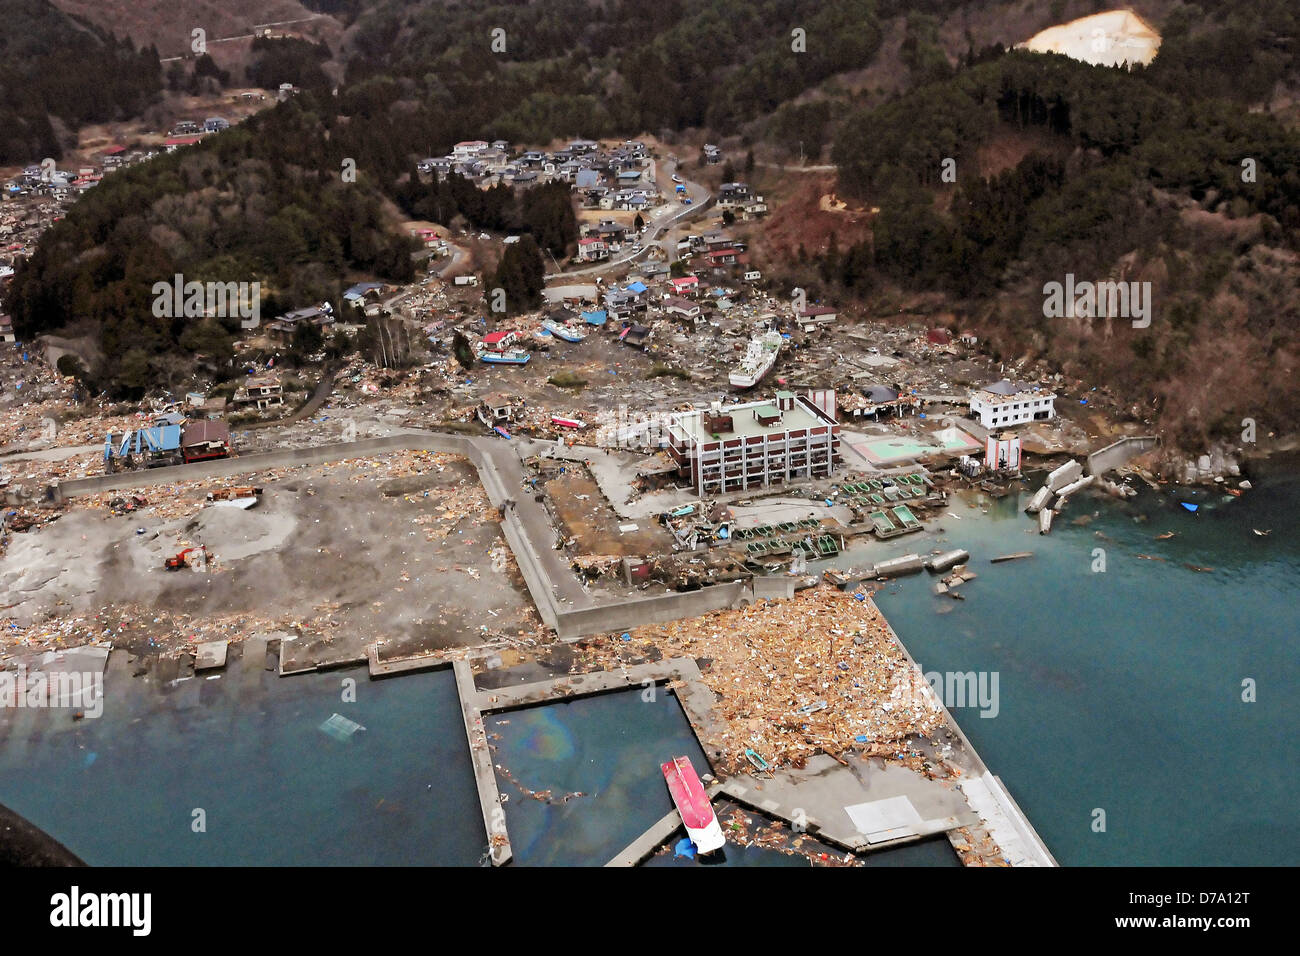 Aerial View Damage After Earthquake Tsunami Stock Photo